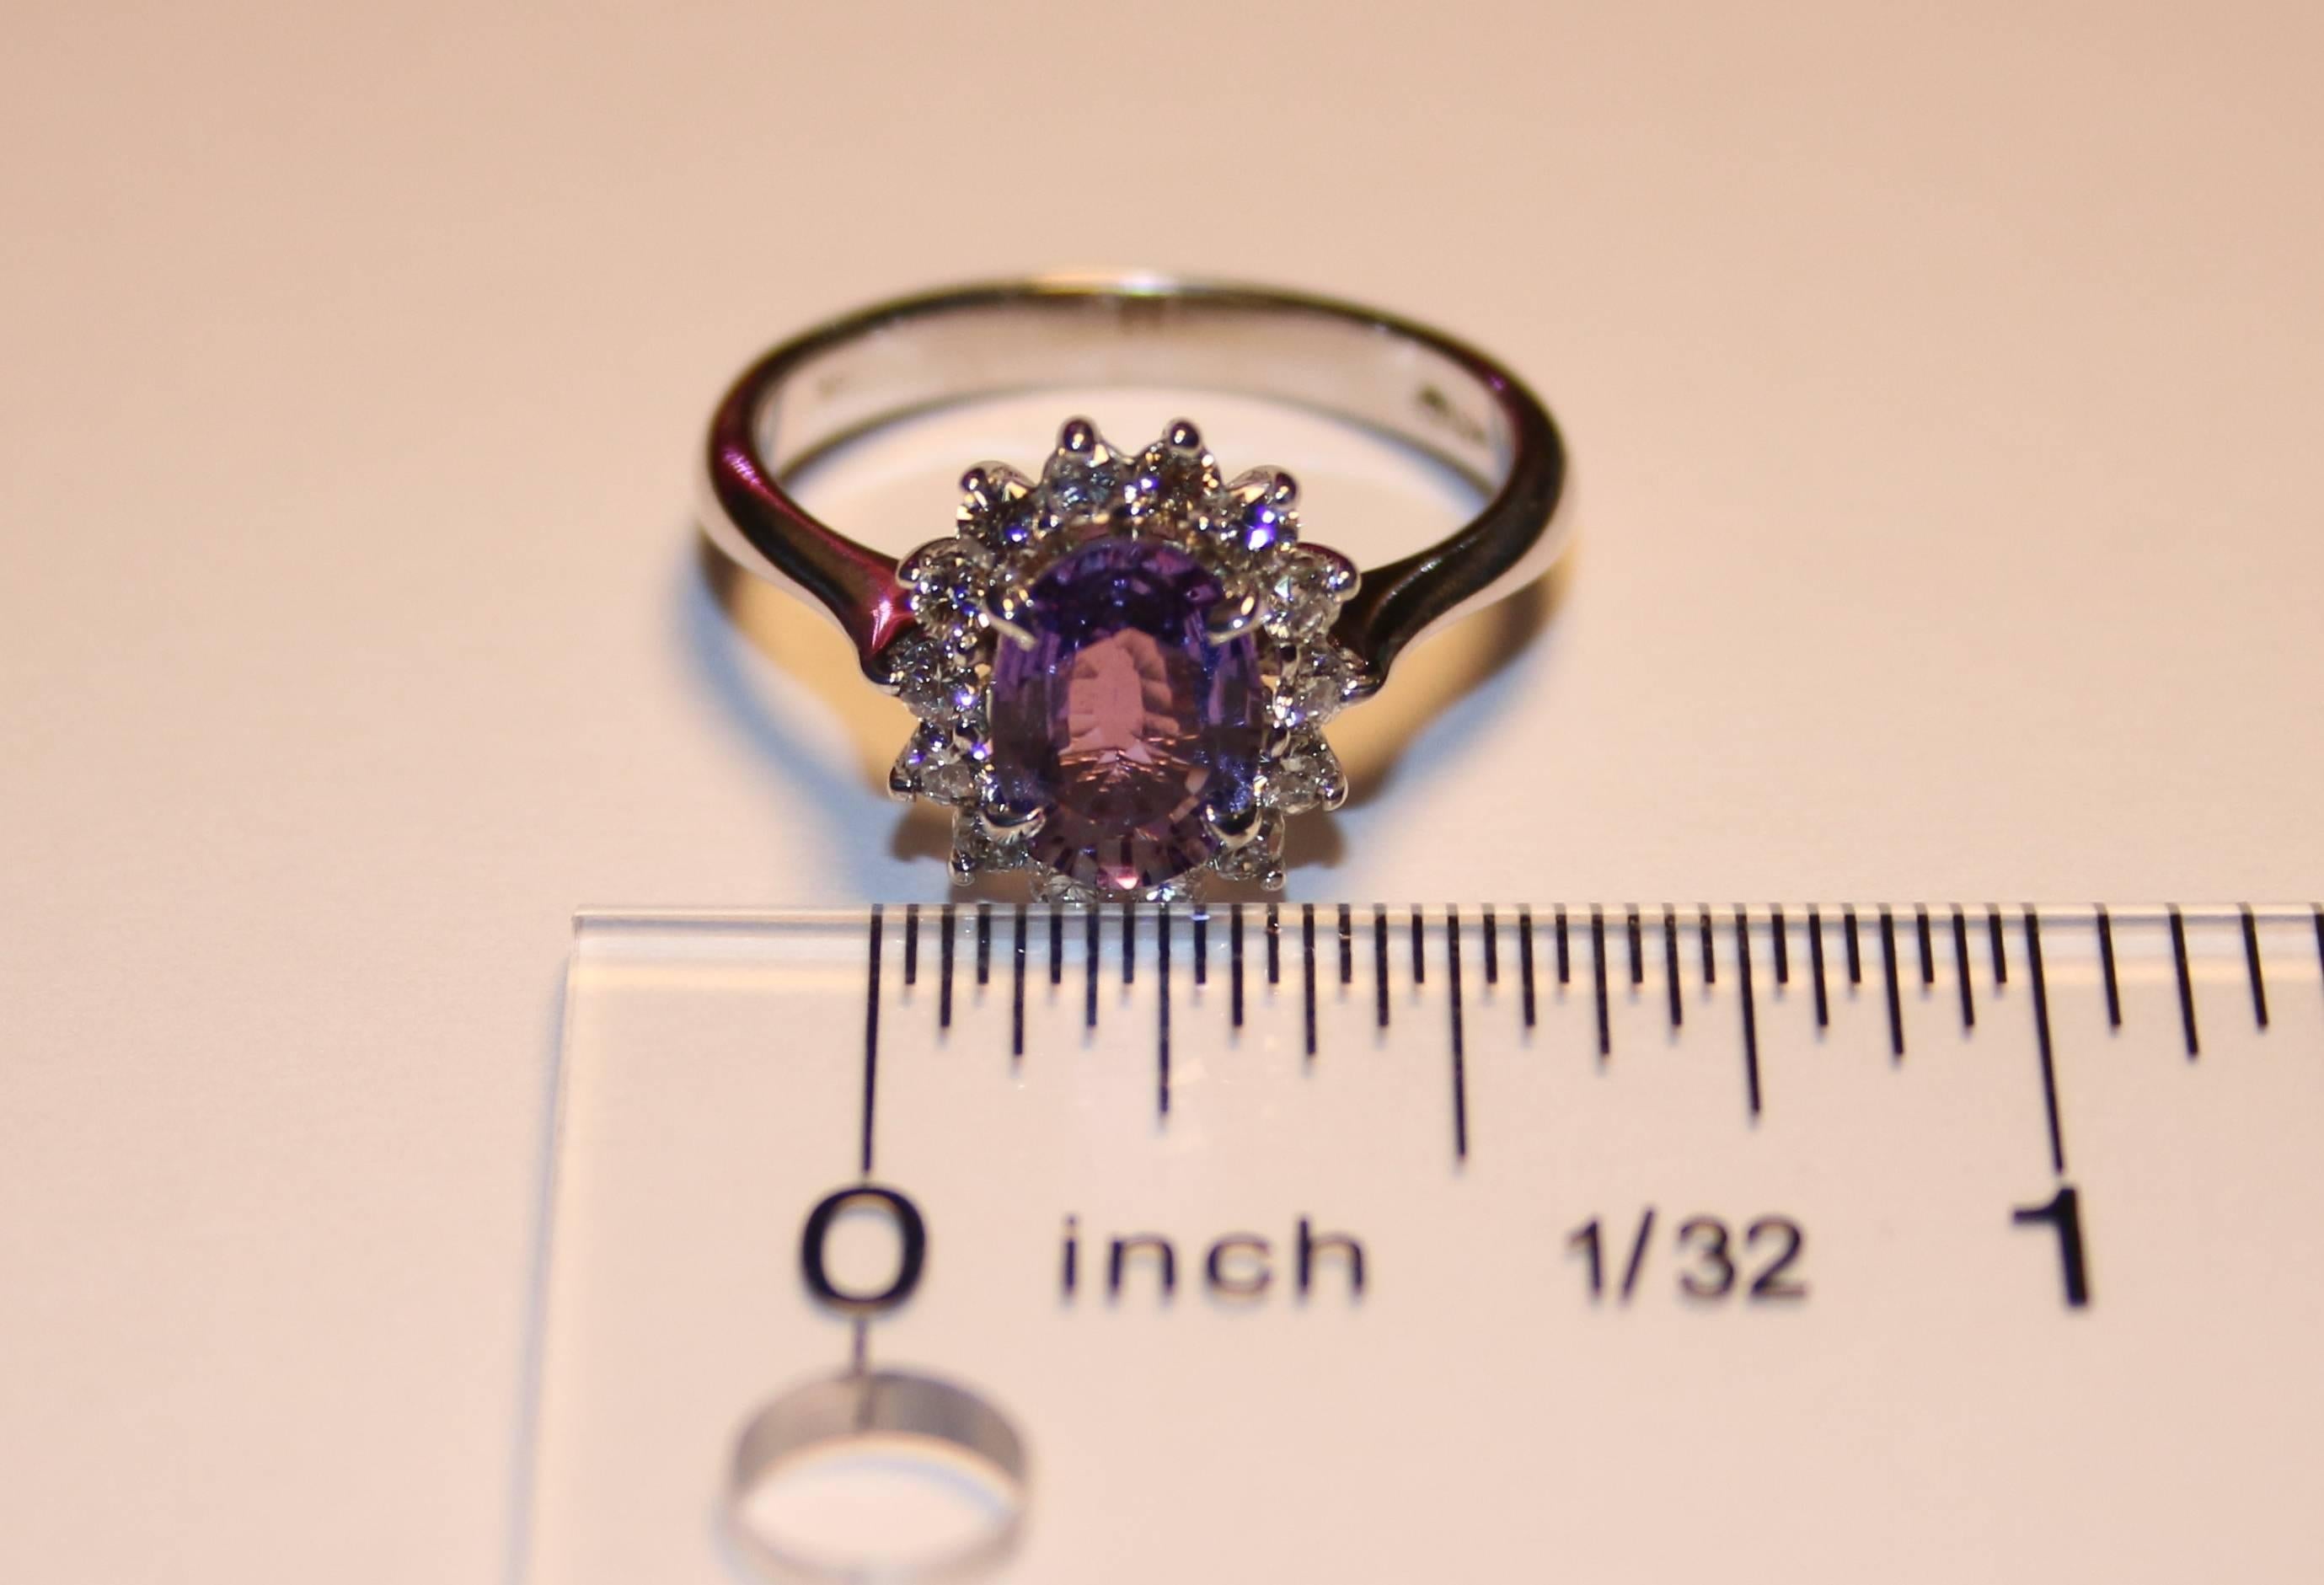 Oval Cut Certified No Heat 1.32 Carats Oval Violet Sapphire Diamond Ring